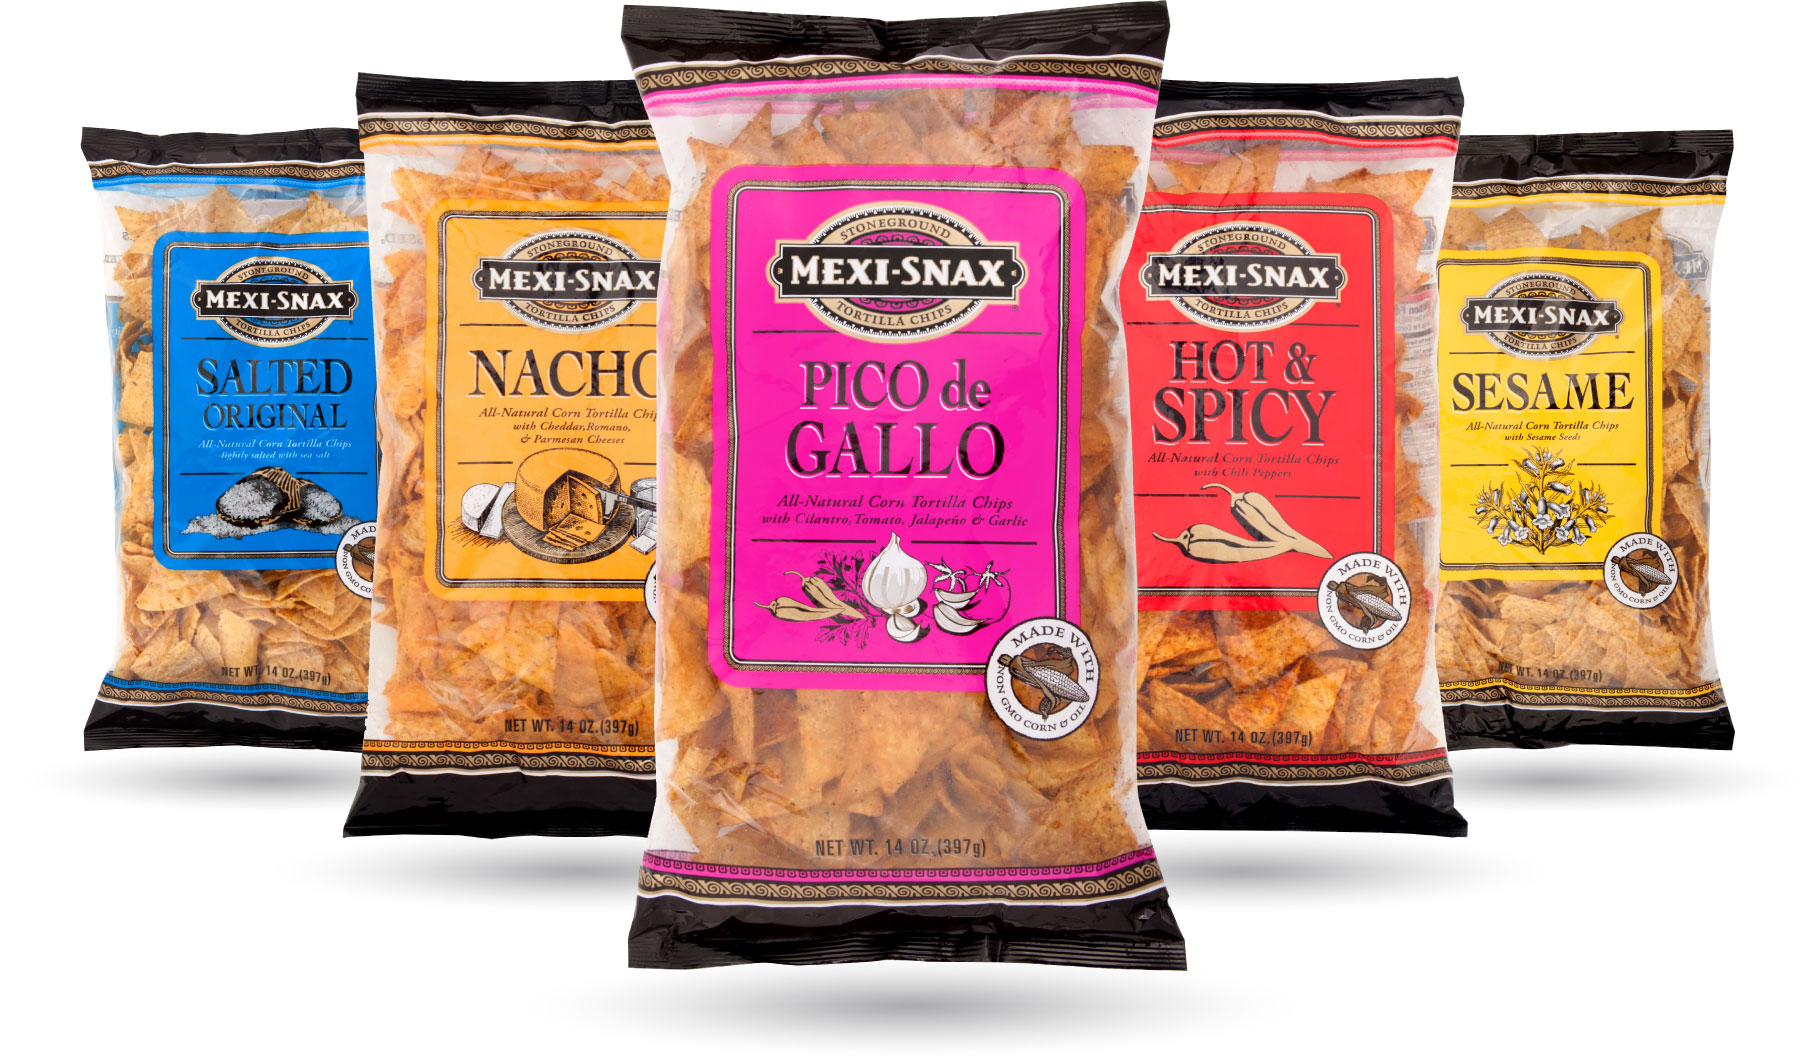 Mexi-Snax Packaging Design